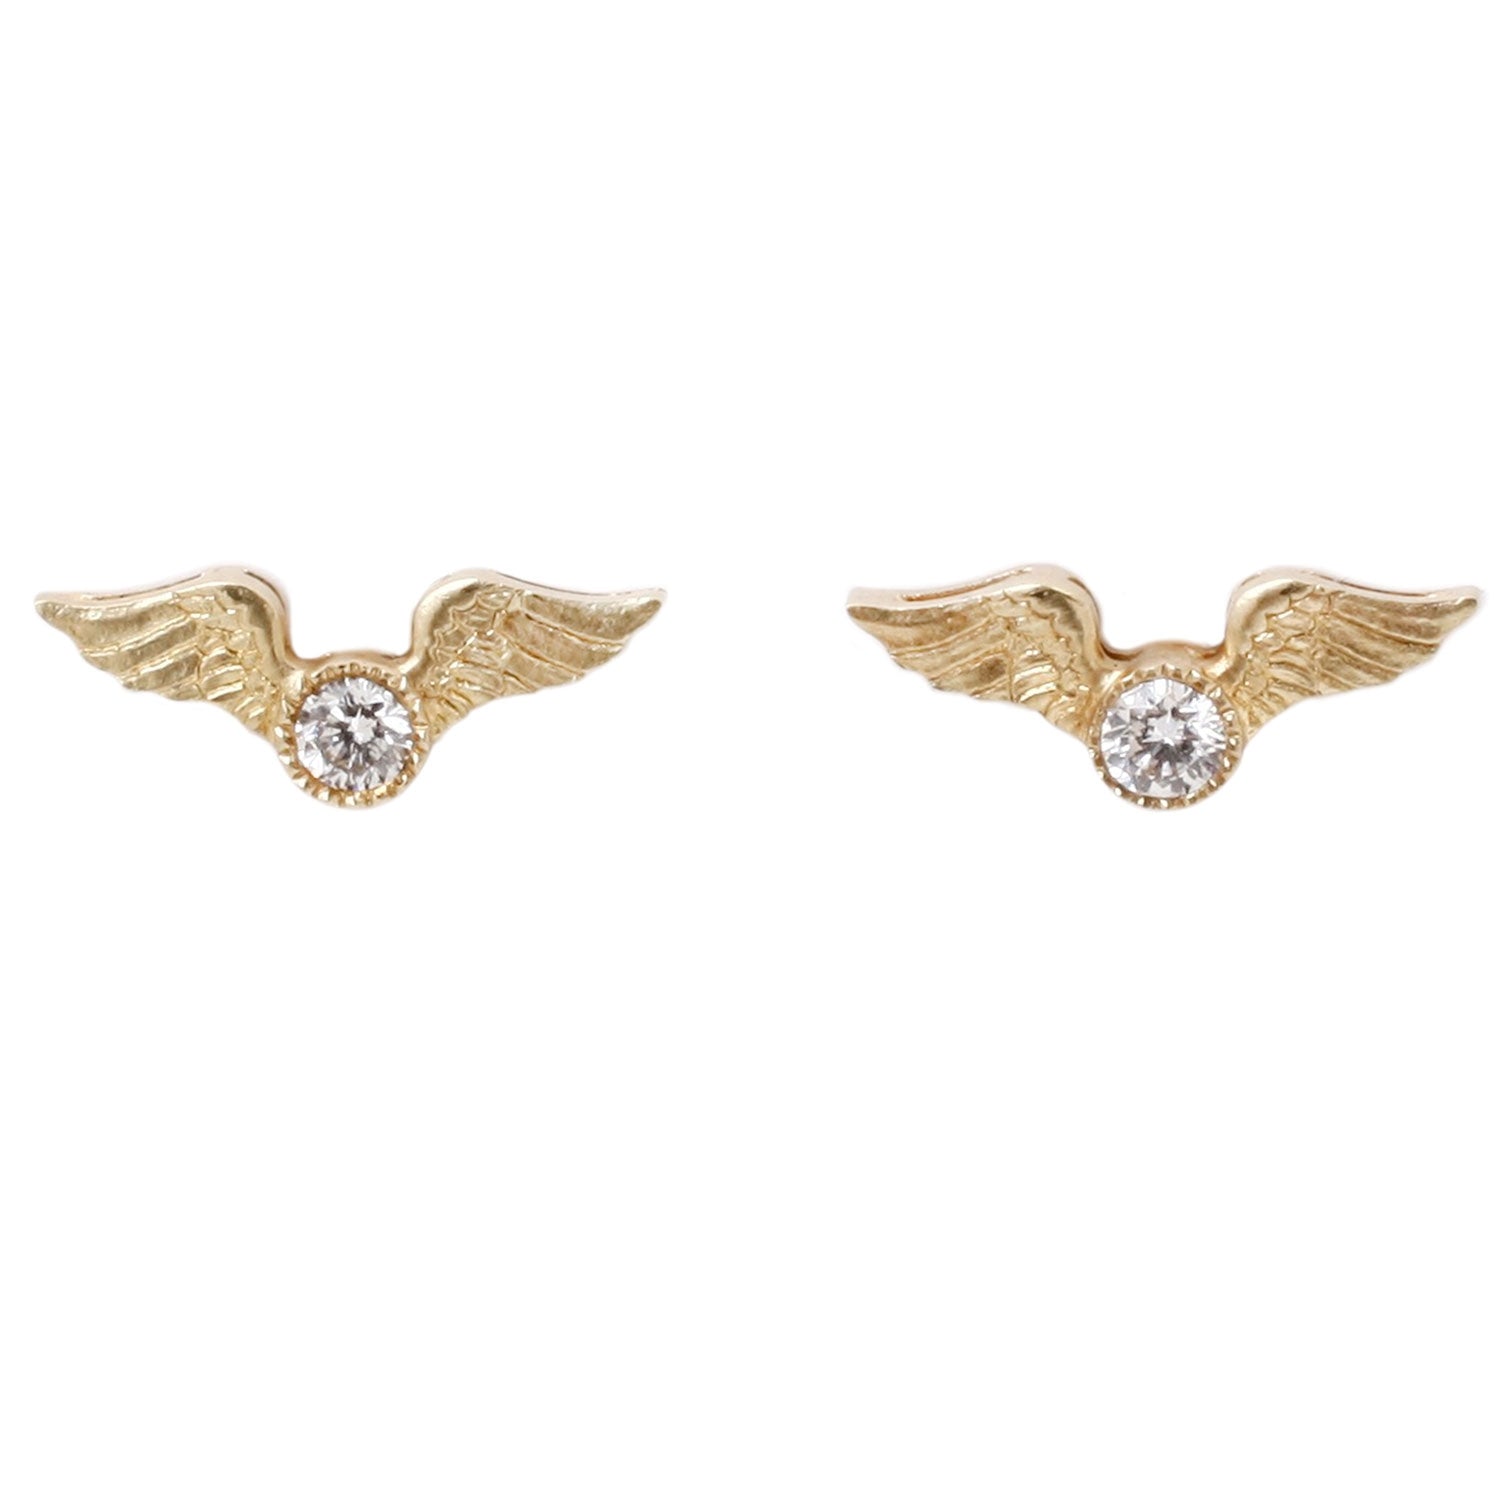 Anthony Lent Flying Diamond Studs. 18k yellow gold with white diamond solitaires.